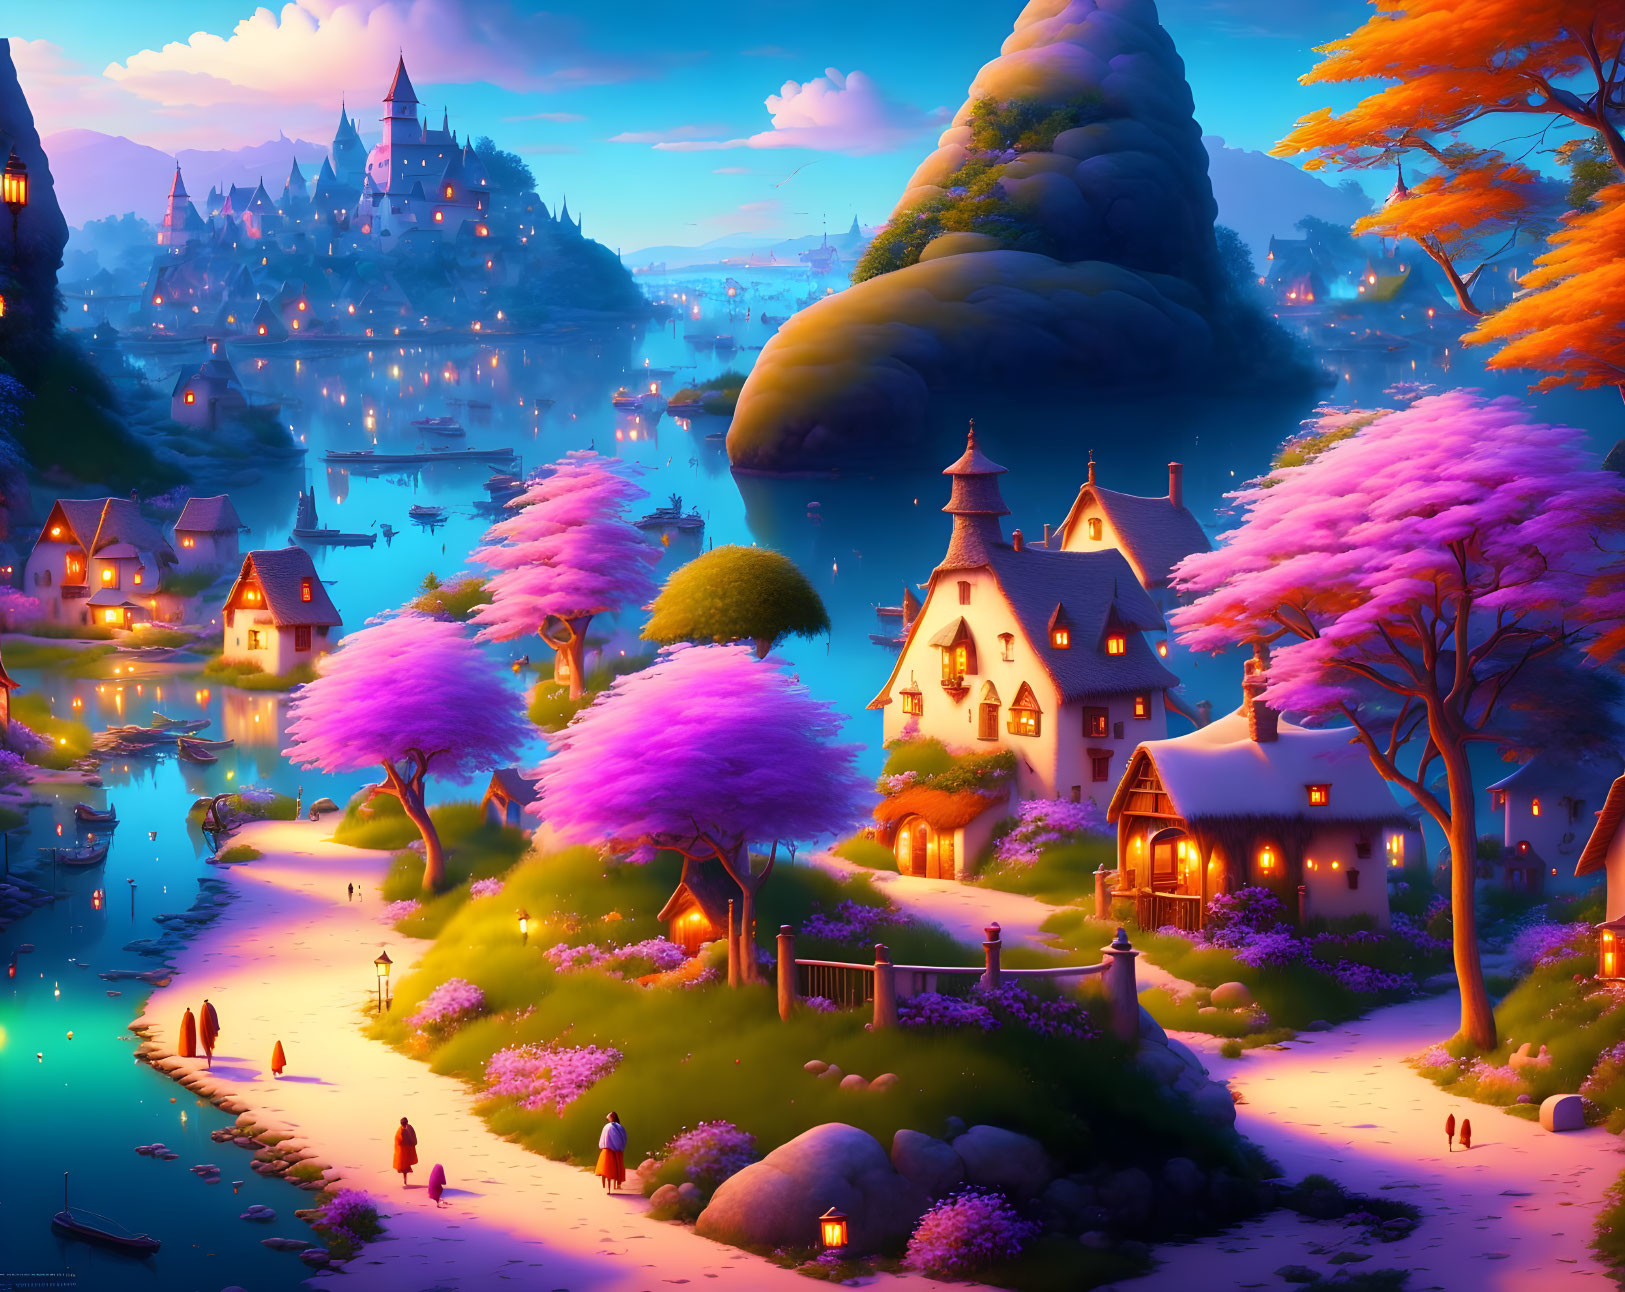 Fantasy village with pink blooming trees, quaint houses, and castle by serene river